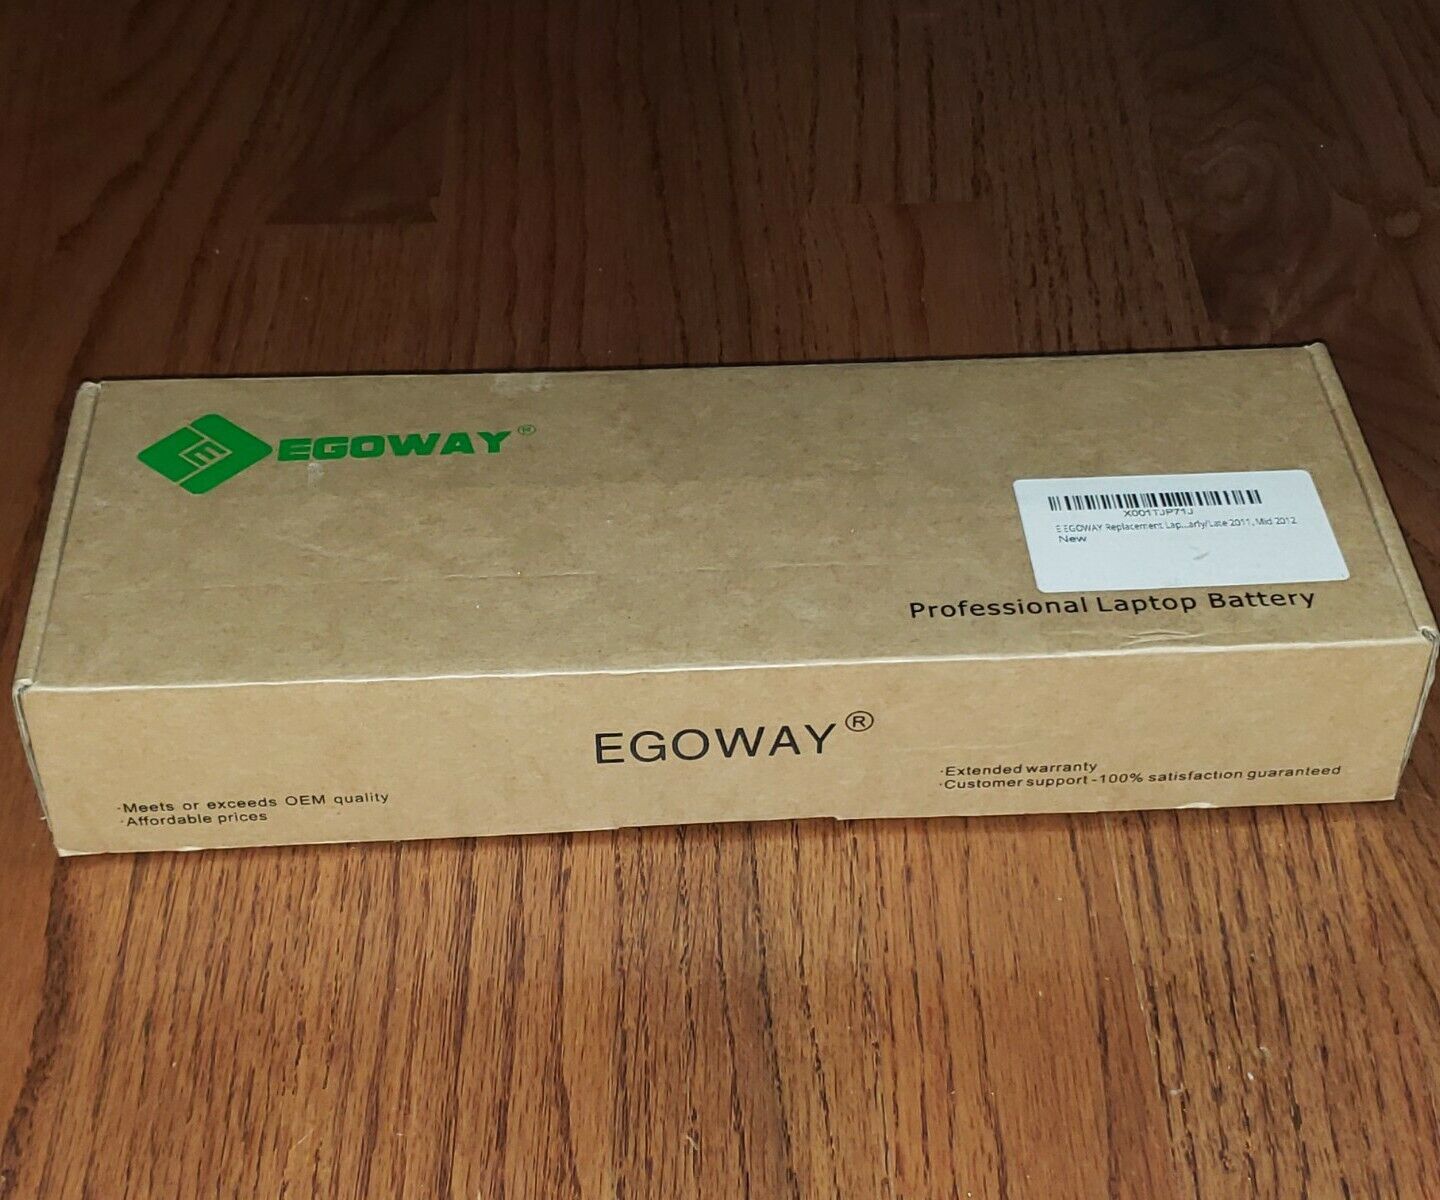 Genuine EGOWAY Battery for Apple Macbook Pro Laptop Computers 15 inch 2011 2012 